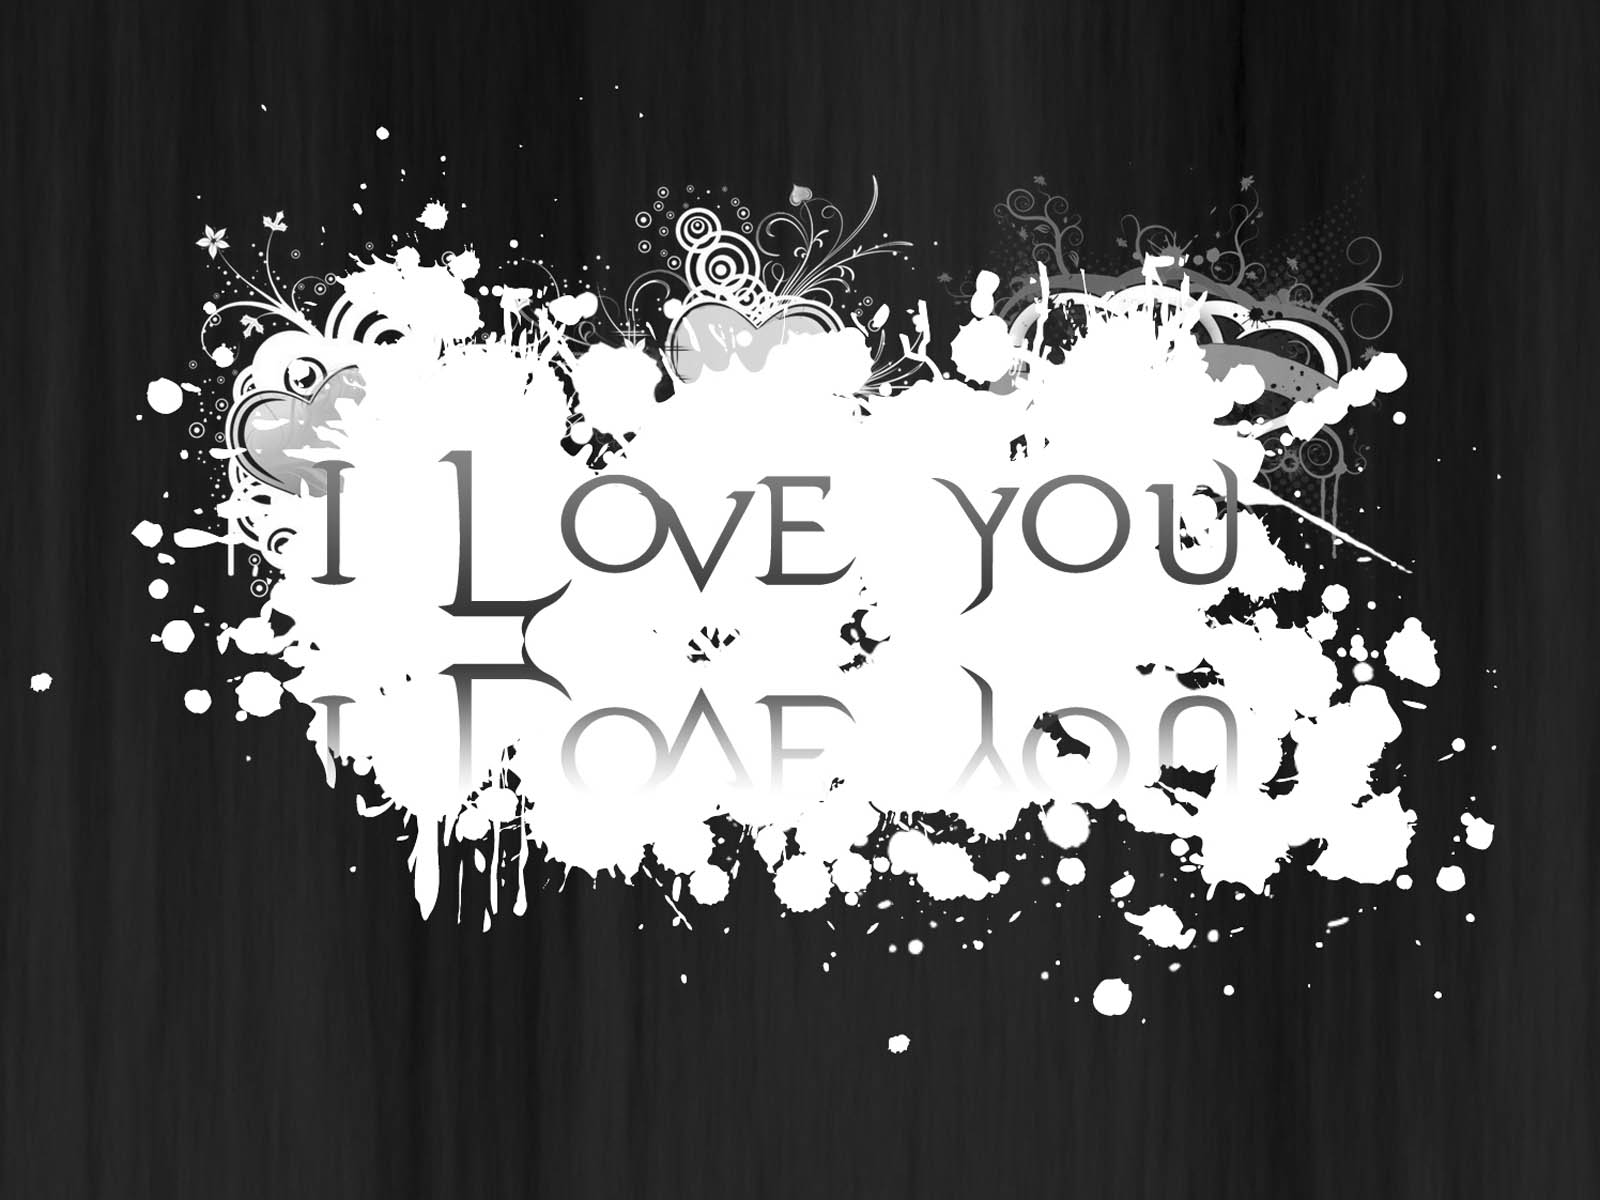 wallpaper high quality: Black and White Love Wallpaper